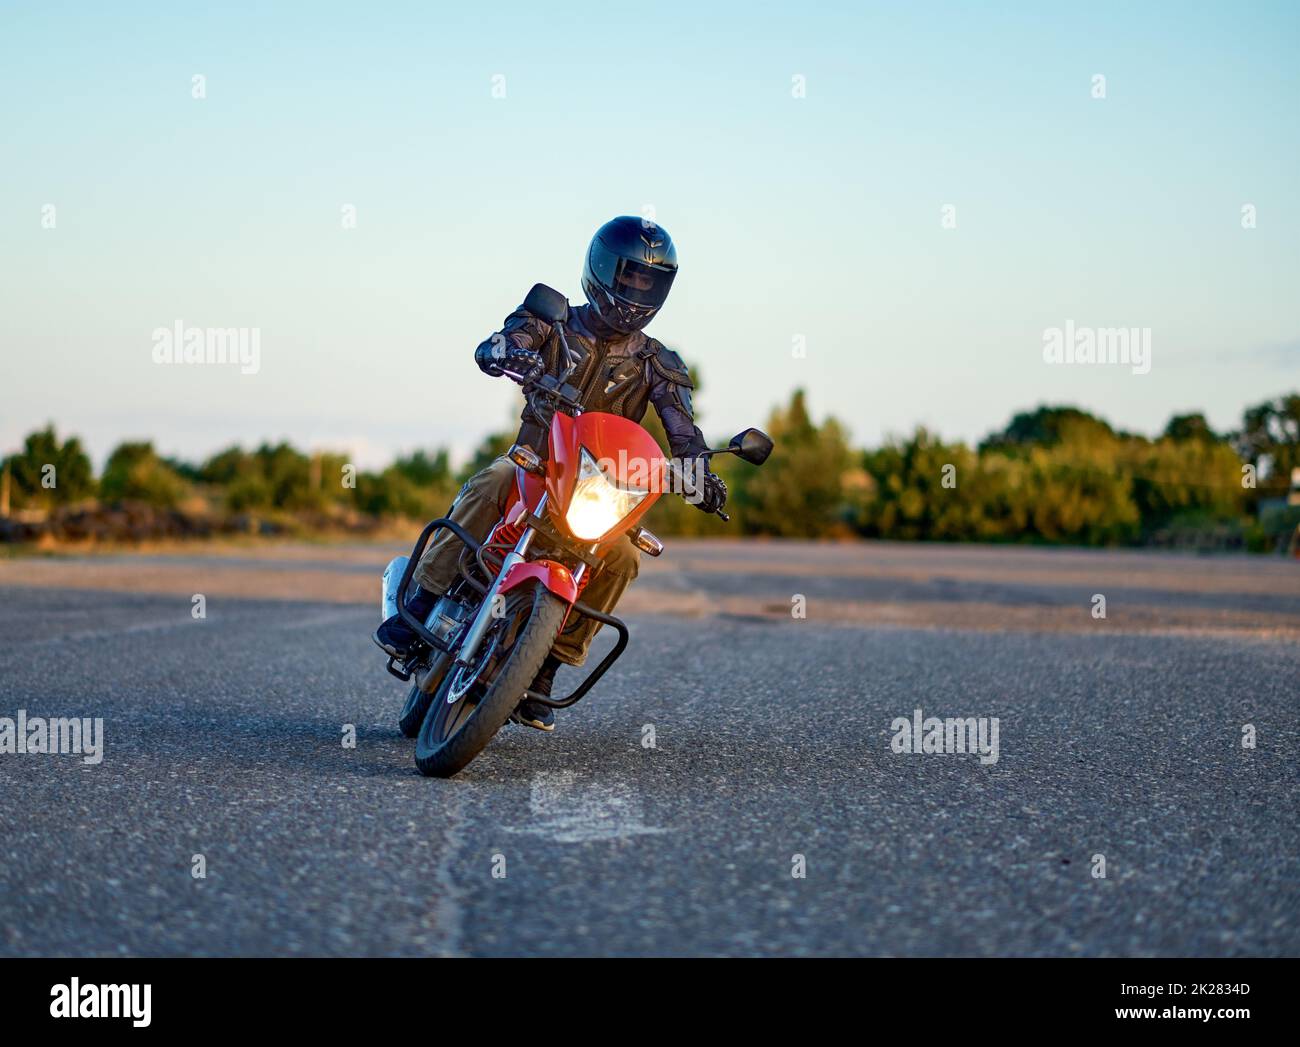 Student riding on motordrome in motorcycle school Stock Photo